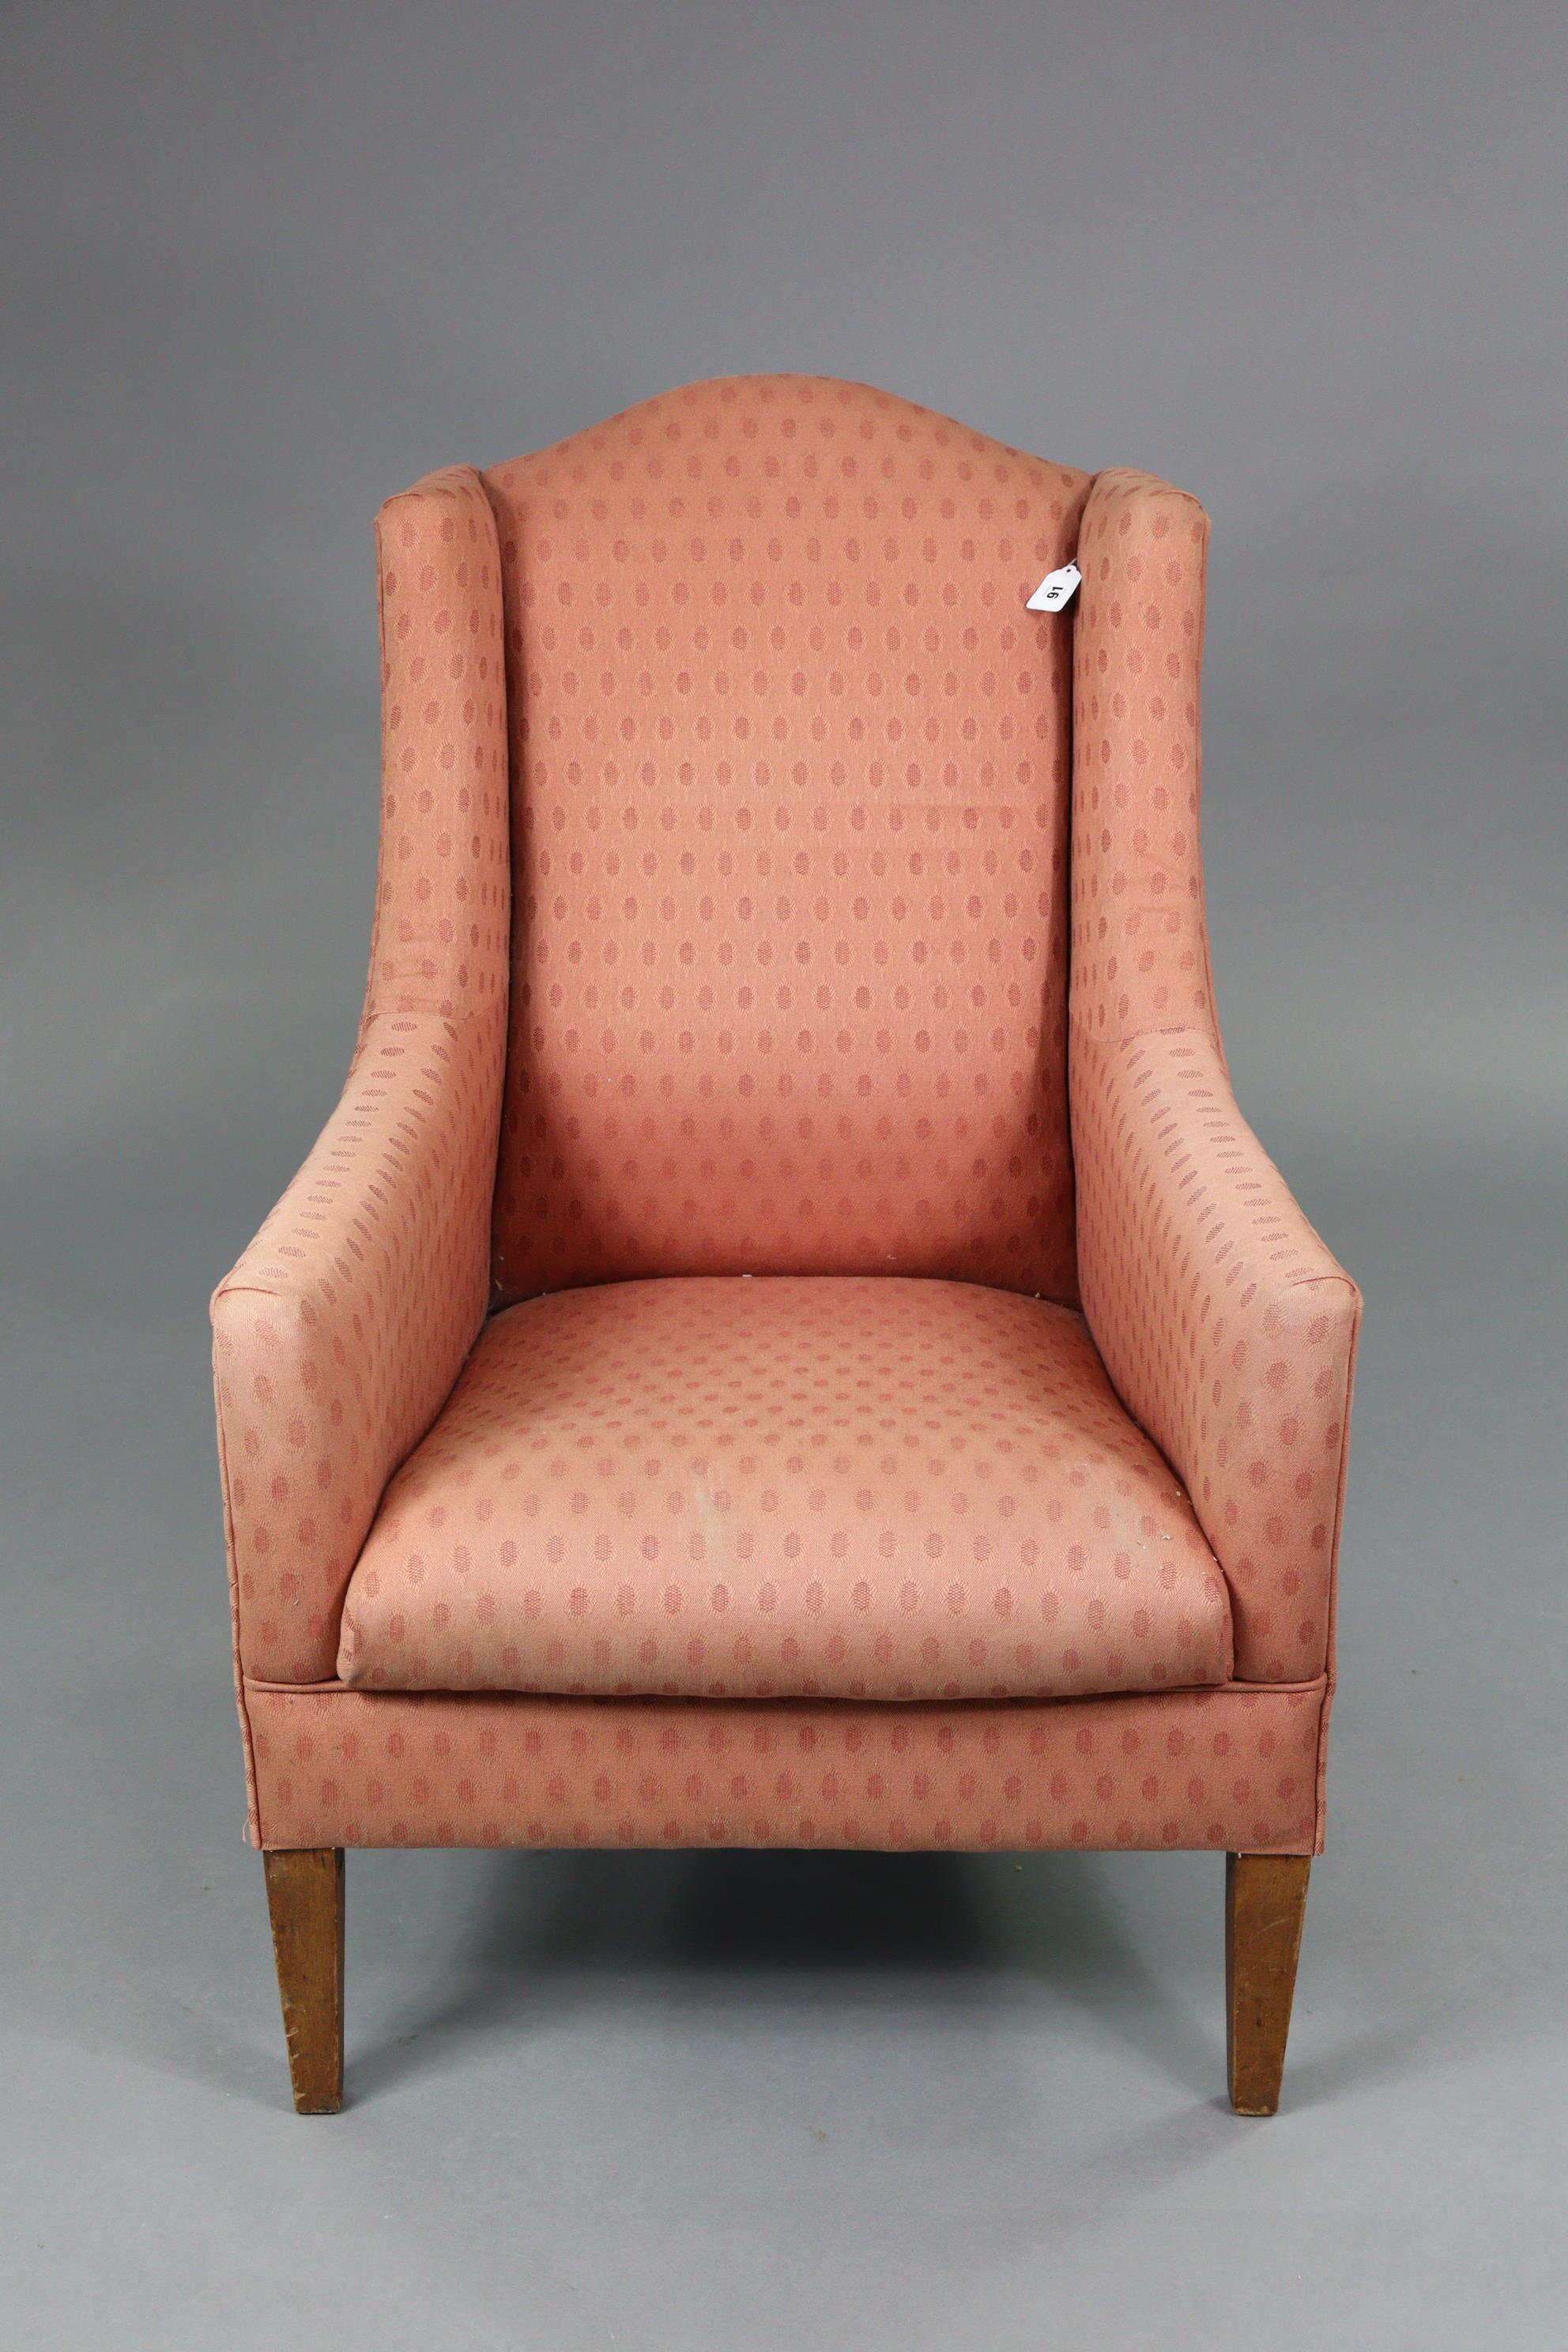 An Edwardian armchair with rounded back & sprung seat upholstered pink geometric material, & on - Image 2 of 3